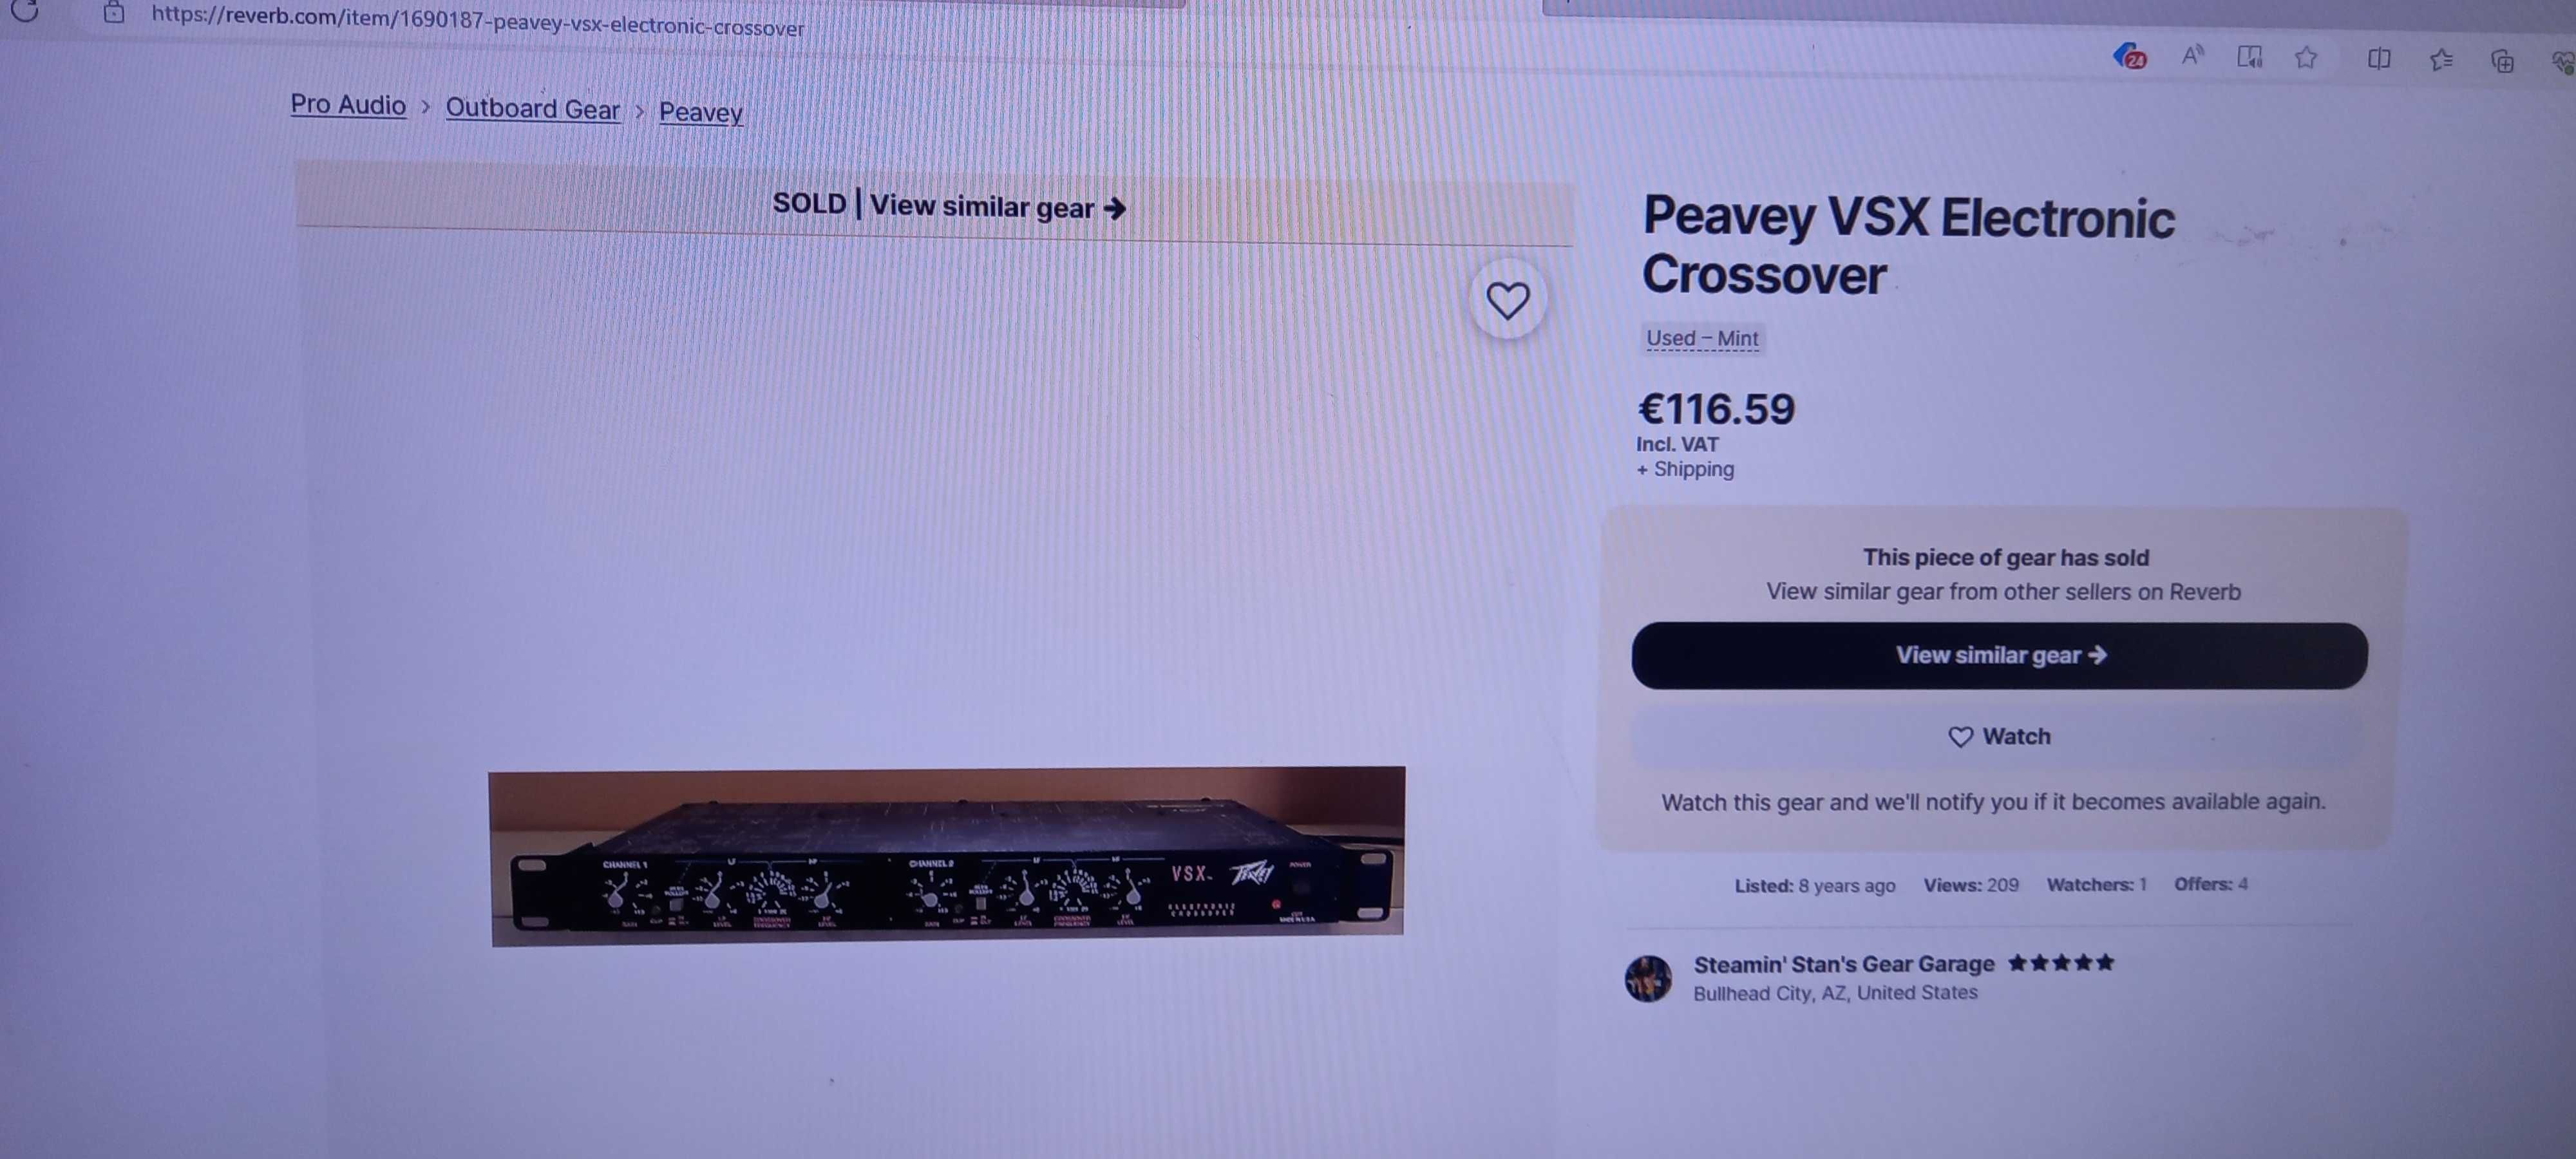 Crossover electronic PEAVEY.